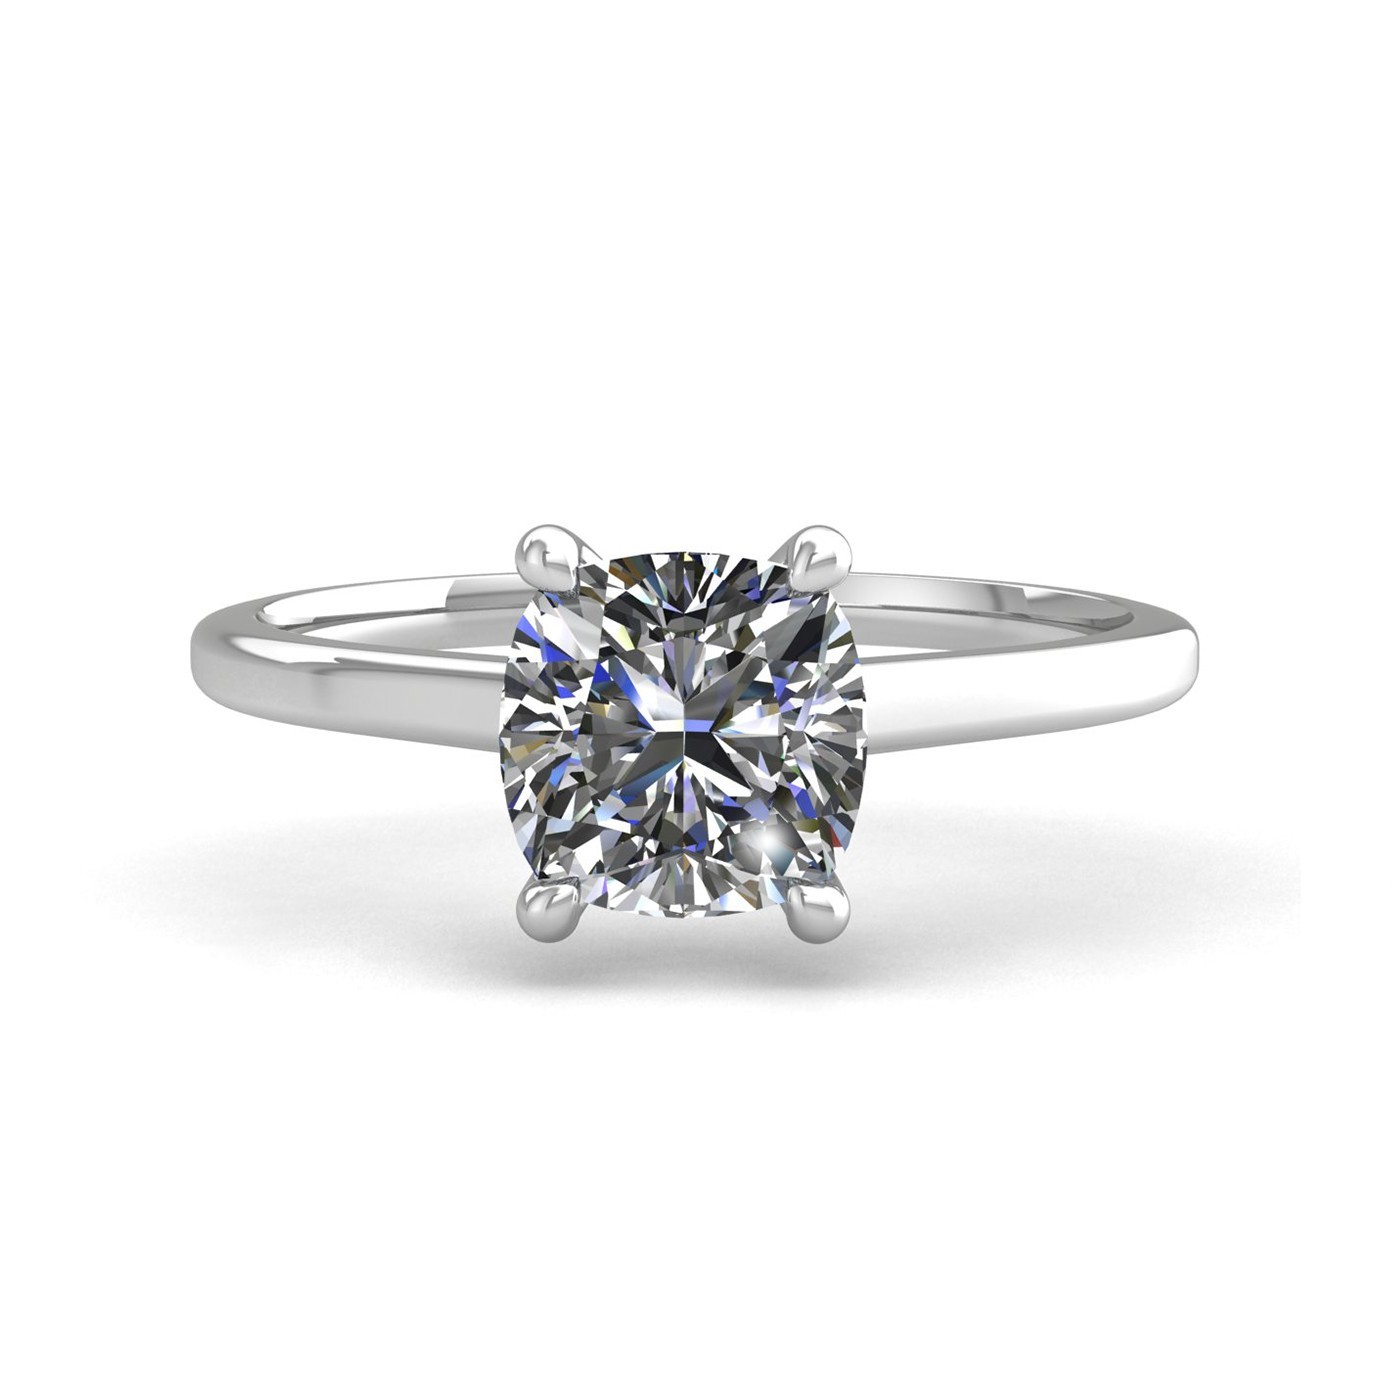 18k white gold 1.2ct 4 prongs solitaire cushion cut diamond engagement ring with whisper thin band